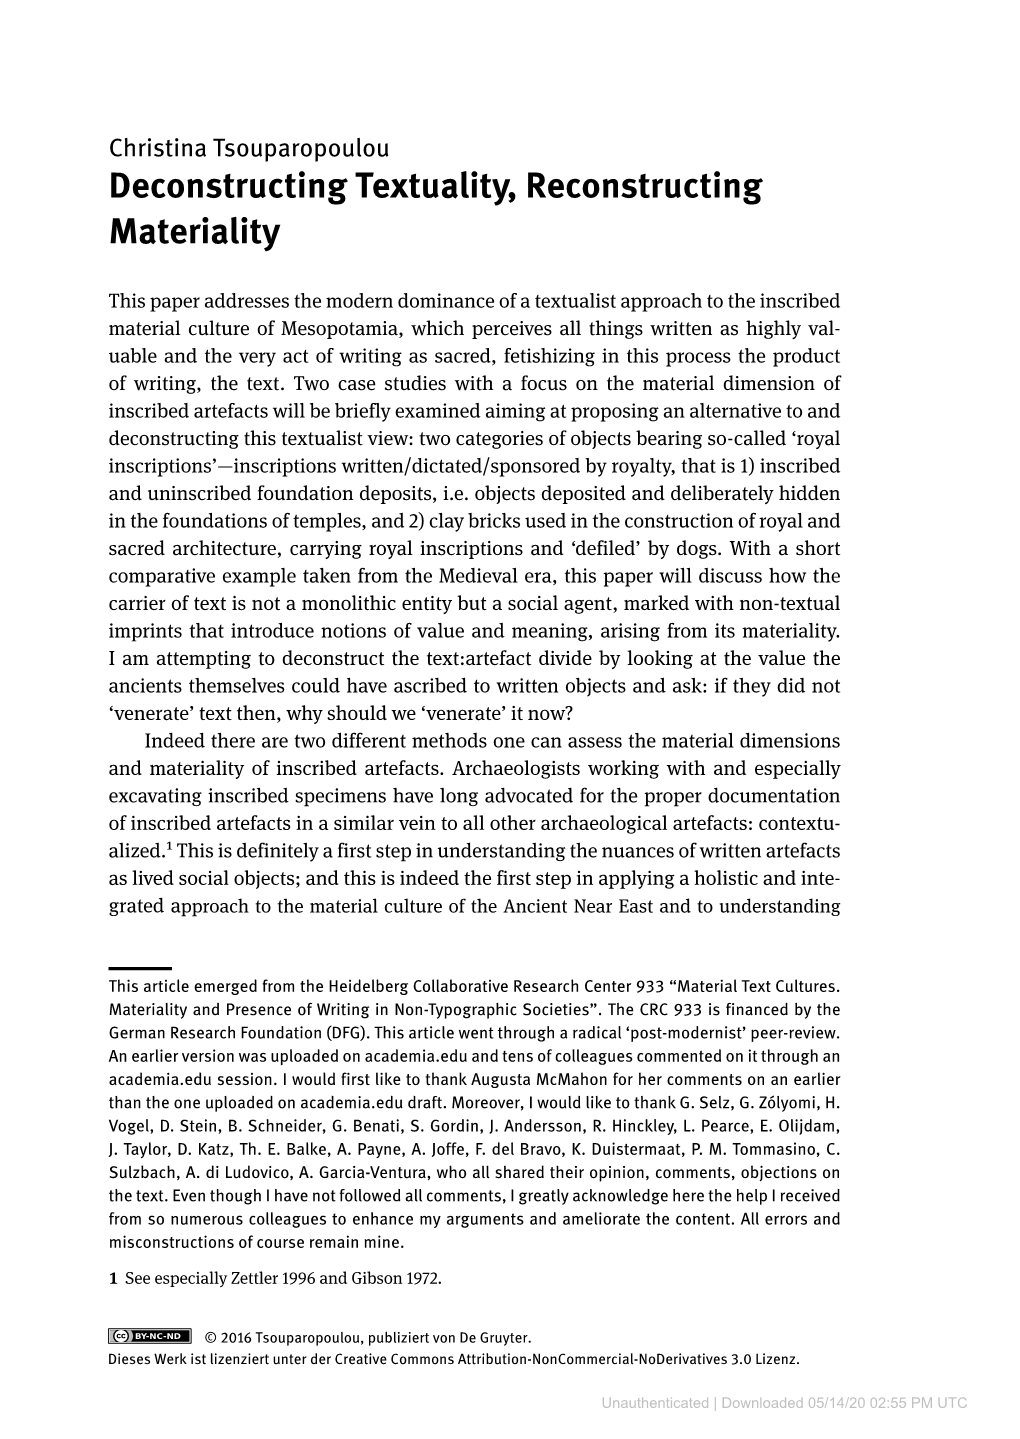 Deconstructing Textuality, Reconstructing Materiality